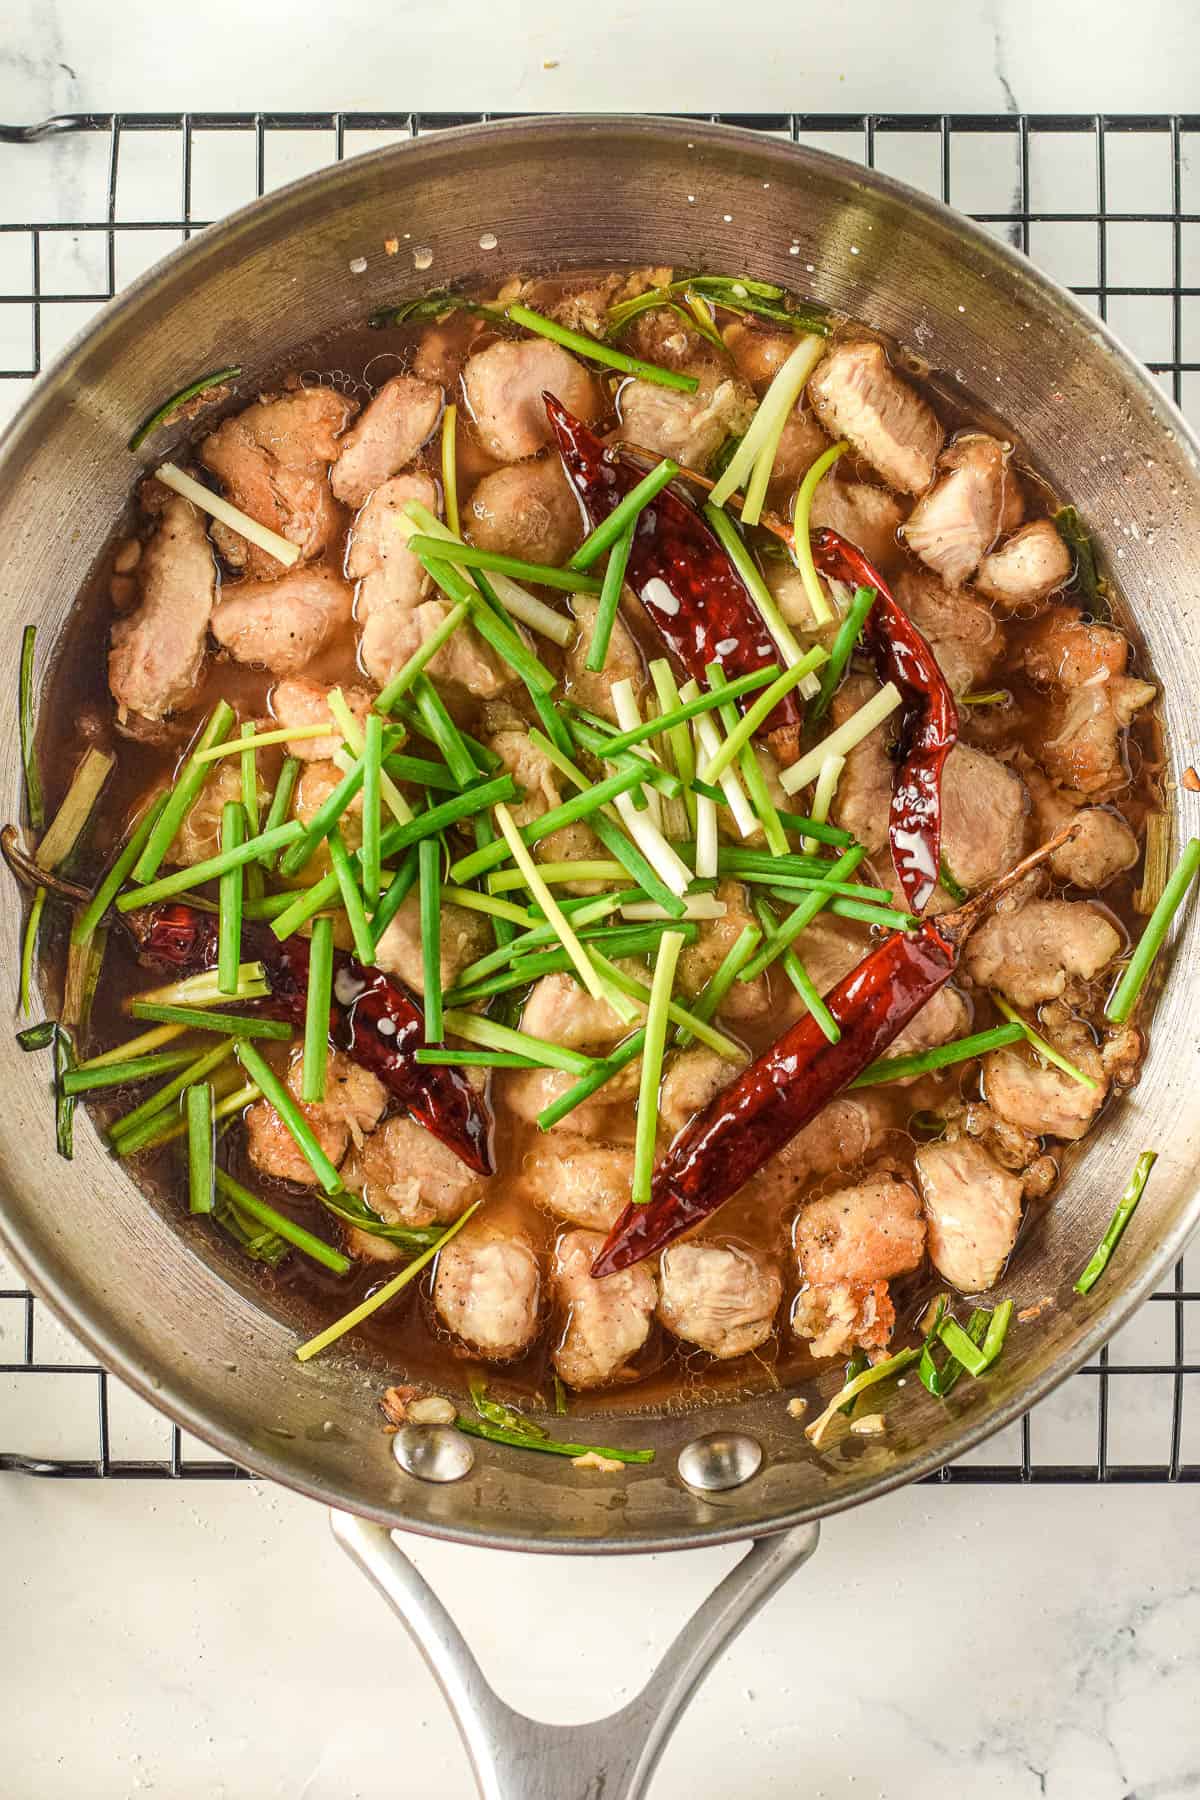 A Mongolian-style pan with chicken and green onions.